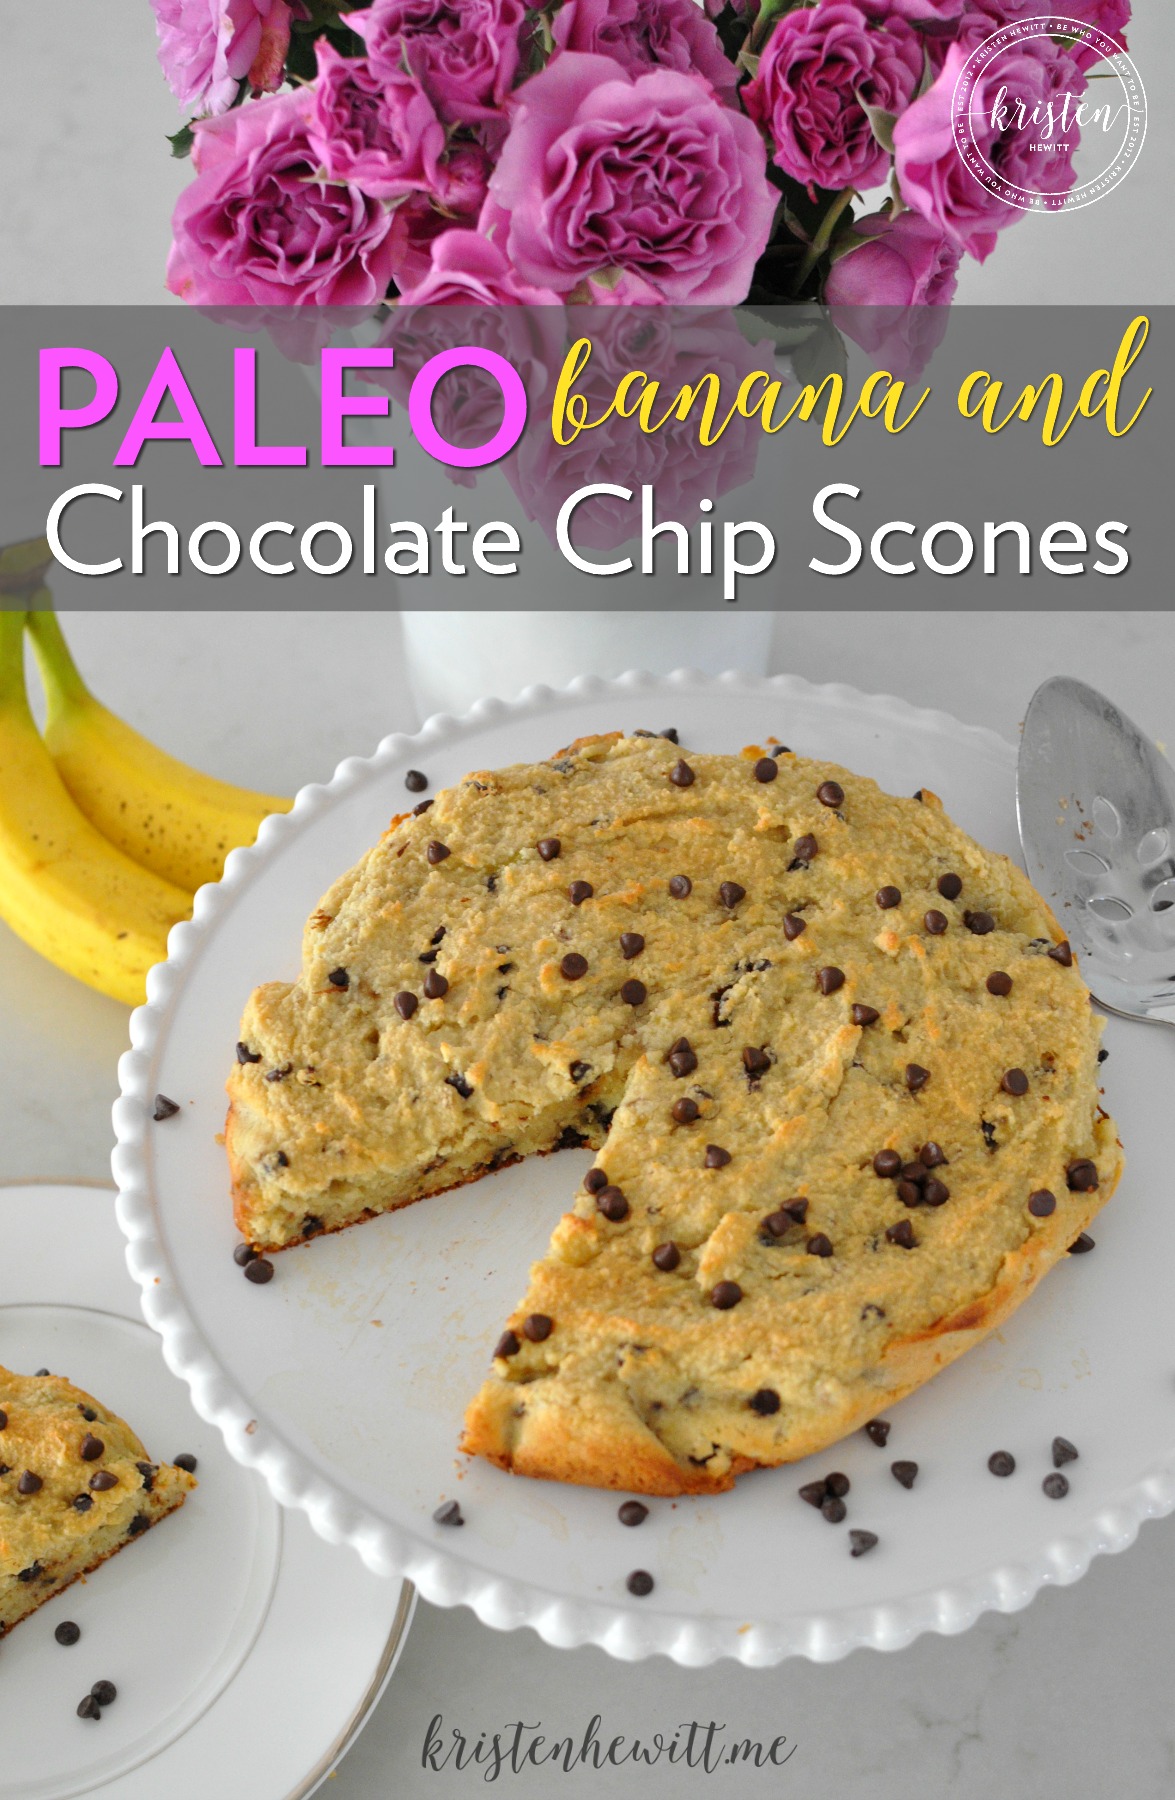 Looking for a new paleo scones recipe? Try these paleo banana chocolate chip scones. They are so easy to make and a delicious treat for breakfast!